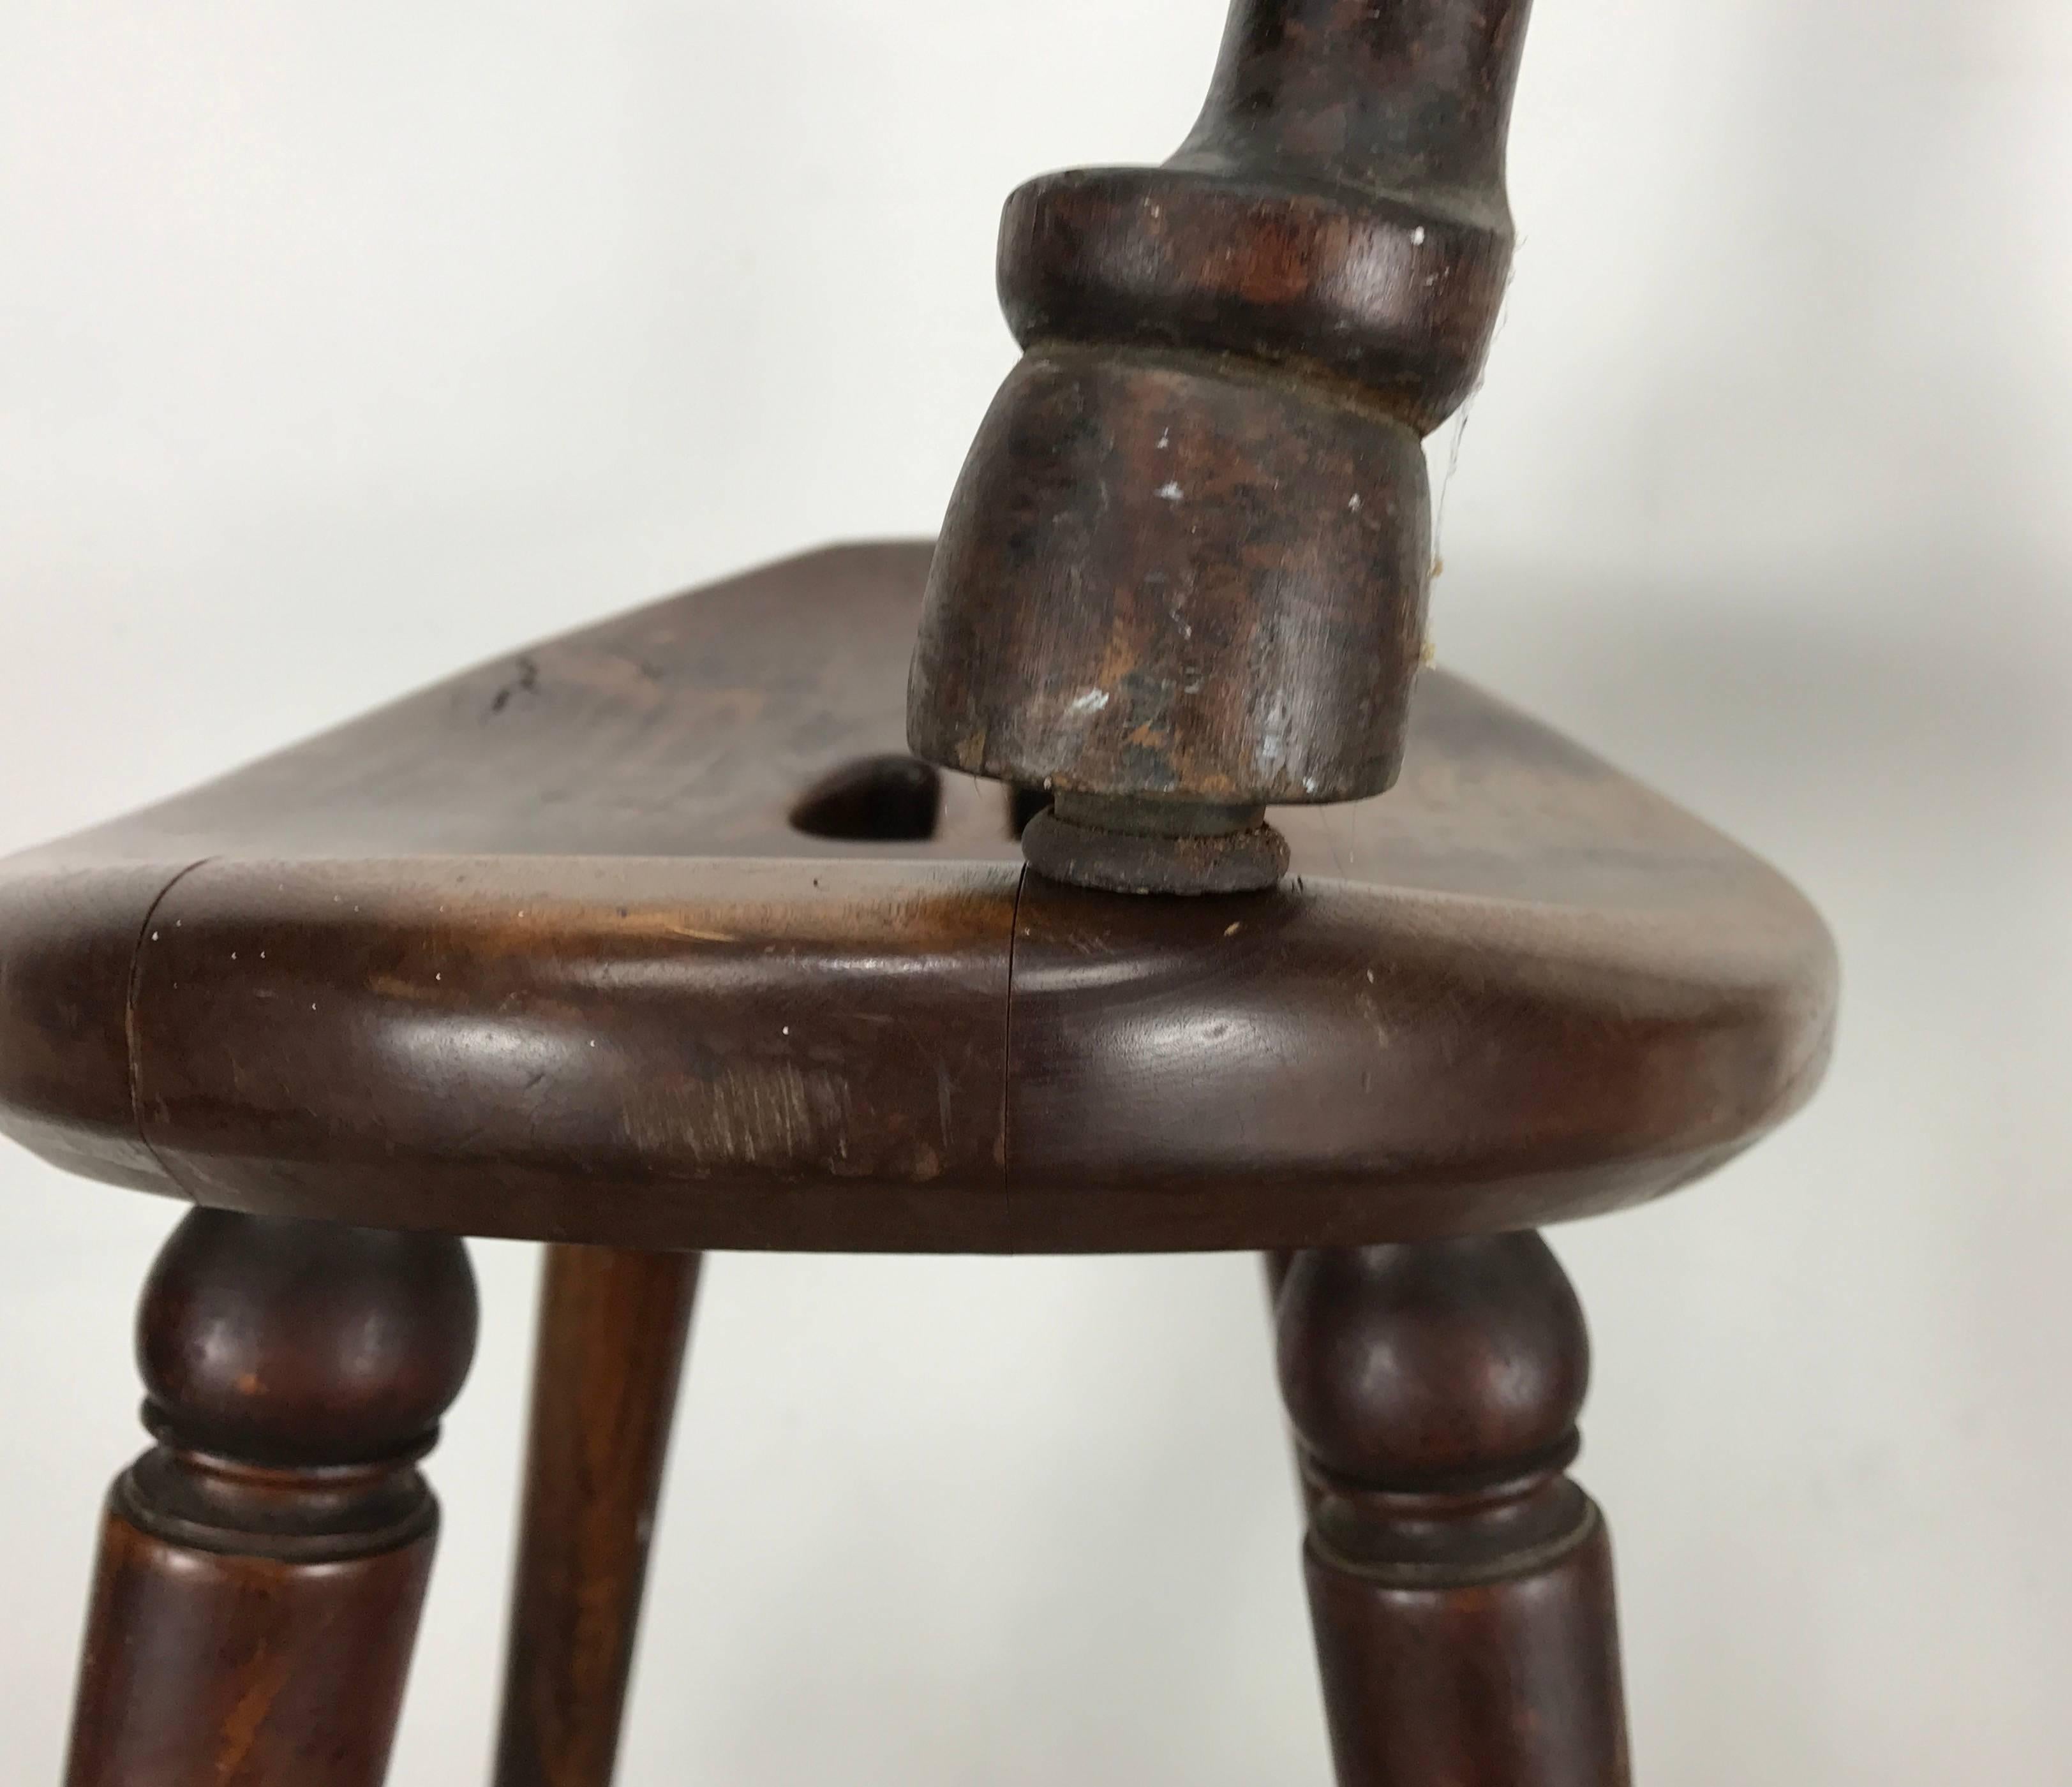 Very unusual set of three matching stools Cowboy Modern Late 1800s featuring solid maple wood construction, hand-carved tops, turned legs terminating with hoof design detail. Amazing patina, color and finish. Extremely comfortable. Superior quality